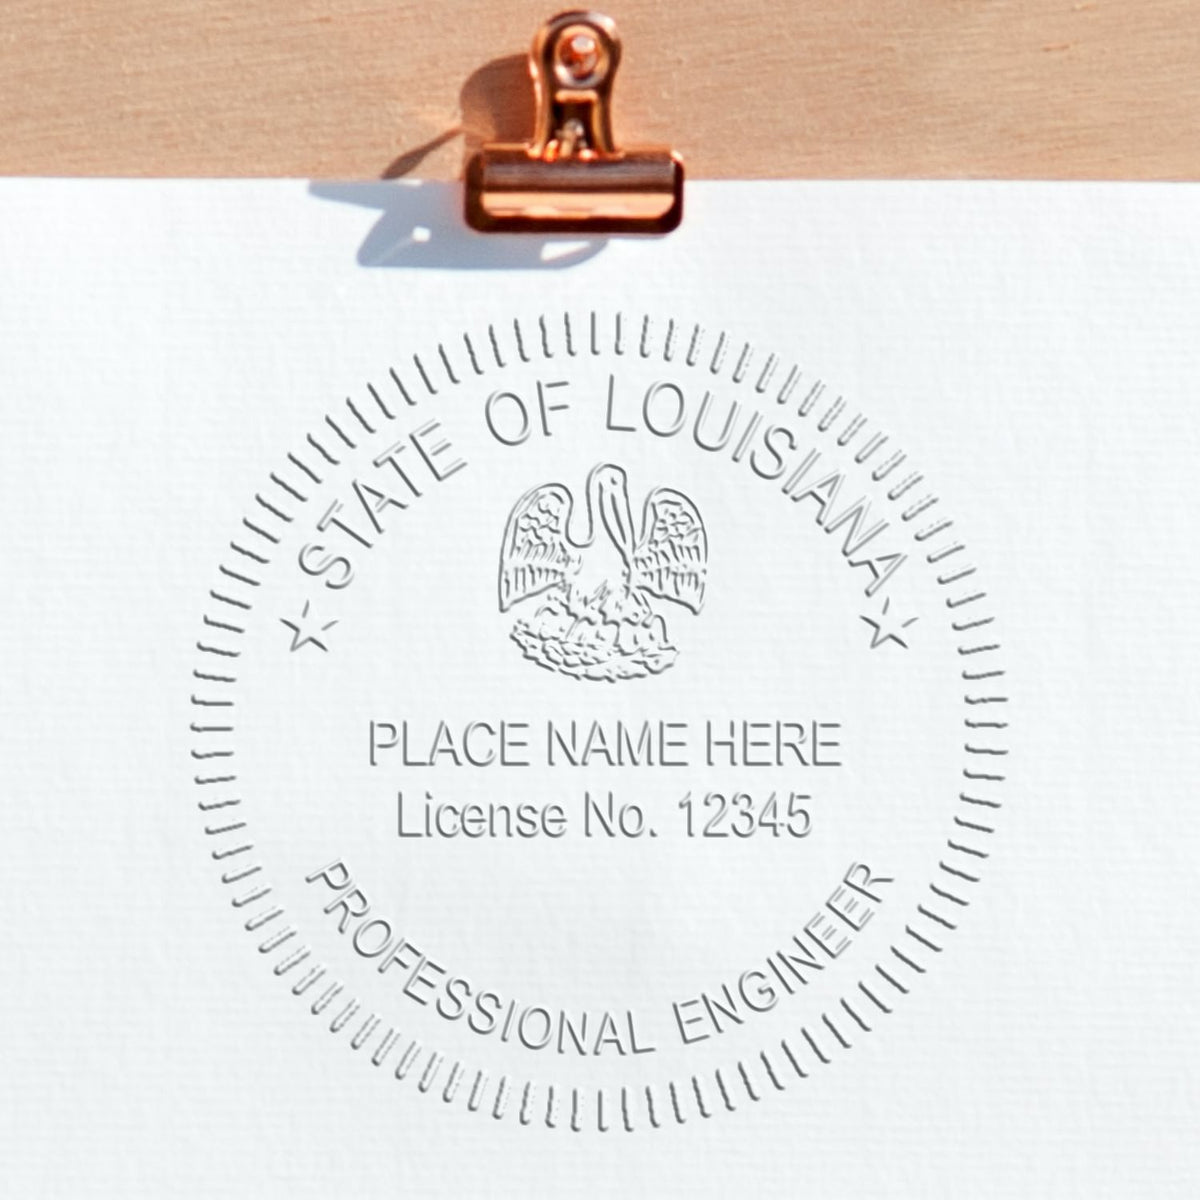 A stamped impression of the Handheld Louisiana Professional Engineer Embosser in this stylish lifestyle photo, setting the tone for a unique and personalized product.